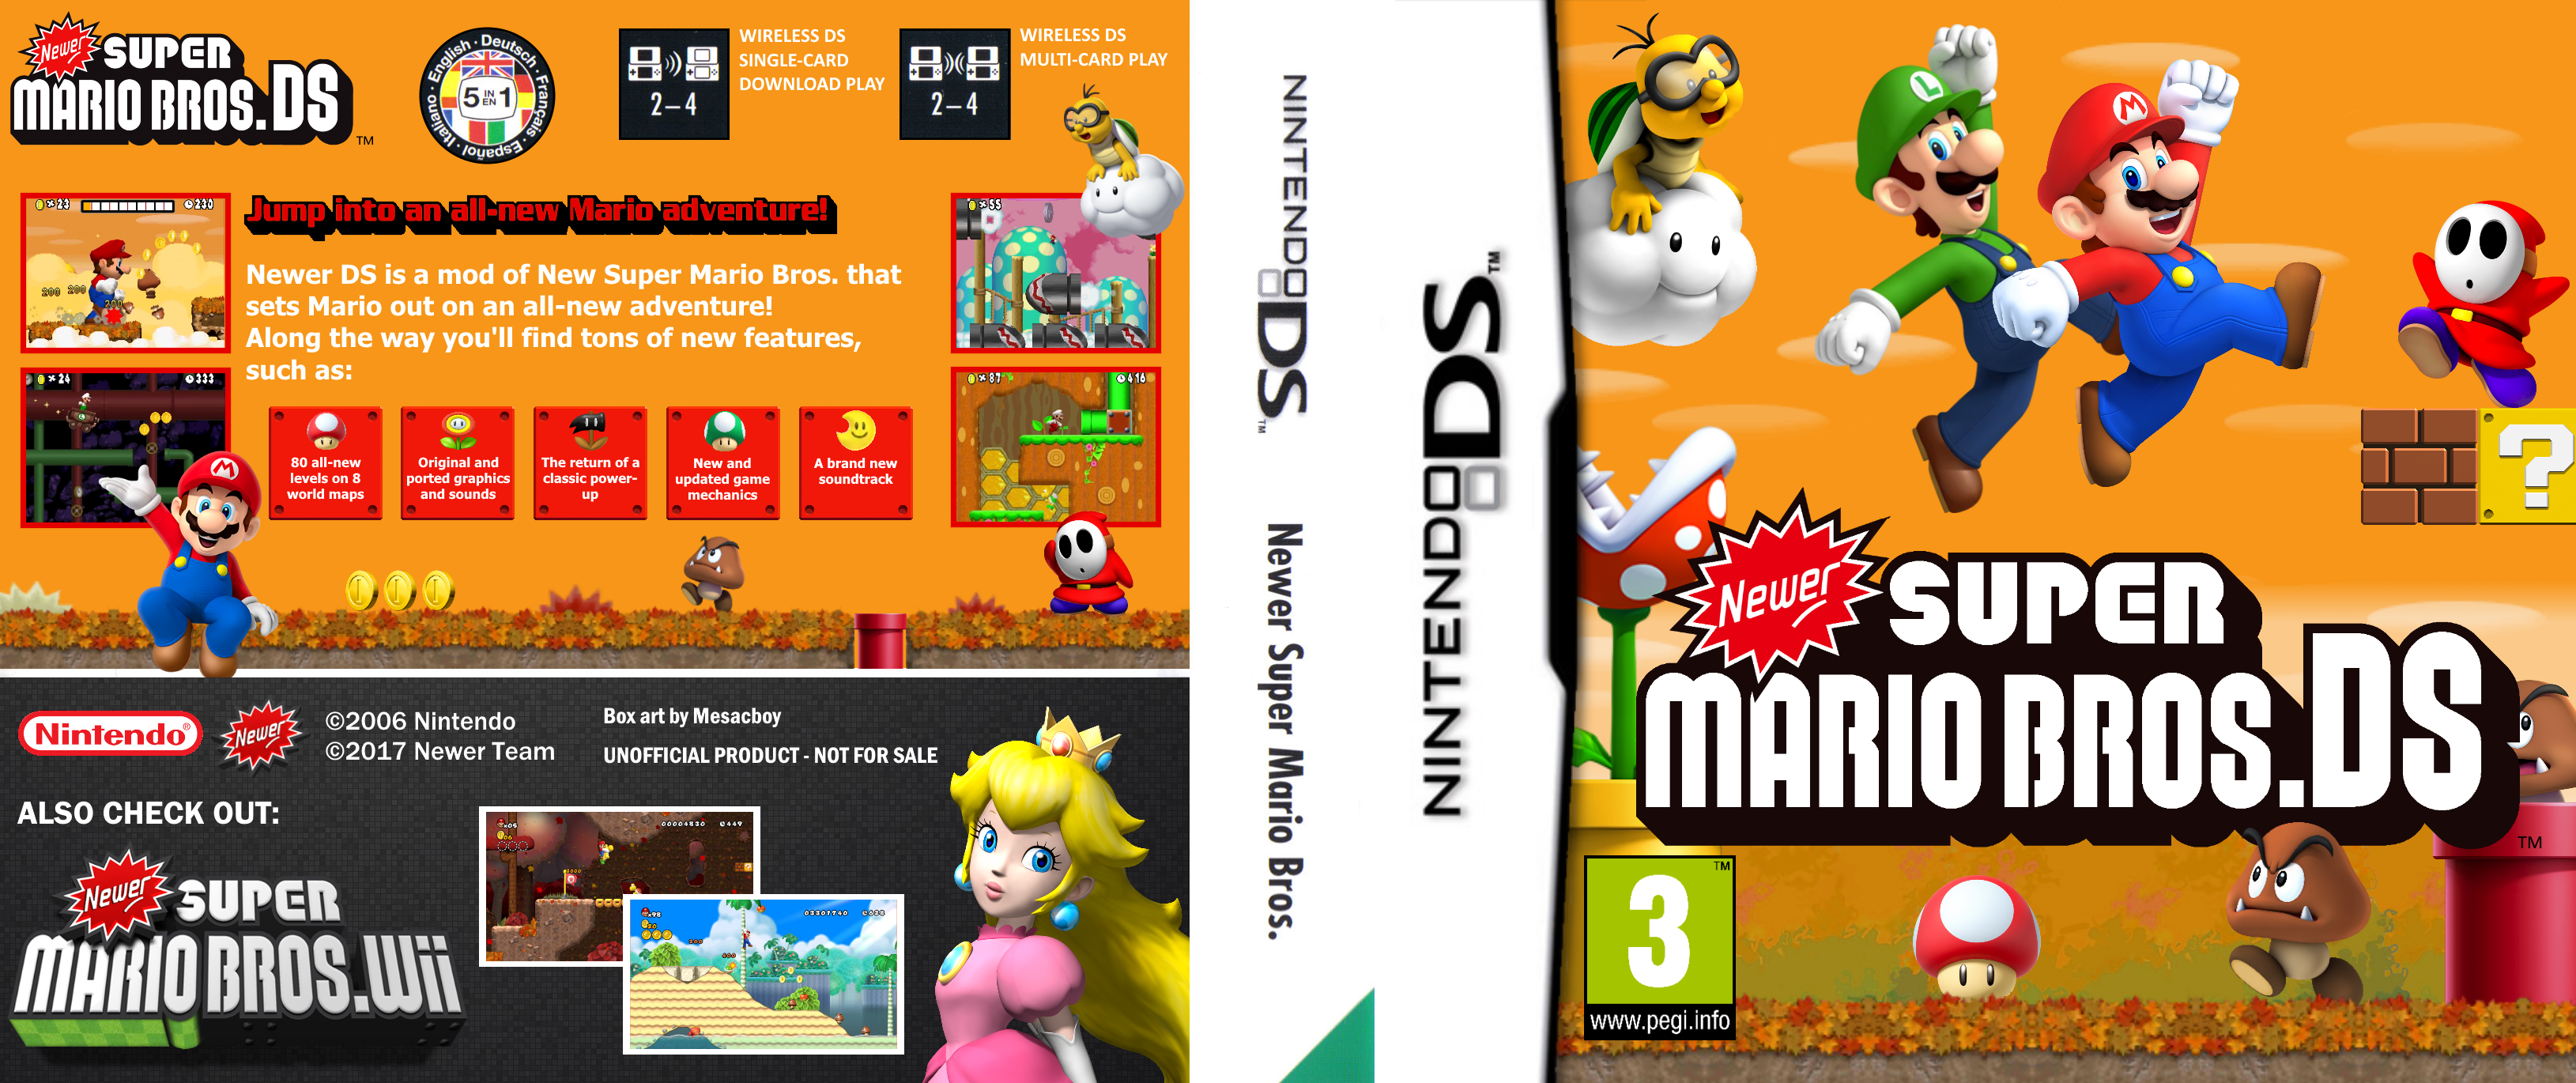 how to download newer super mario bros ds on pc